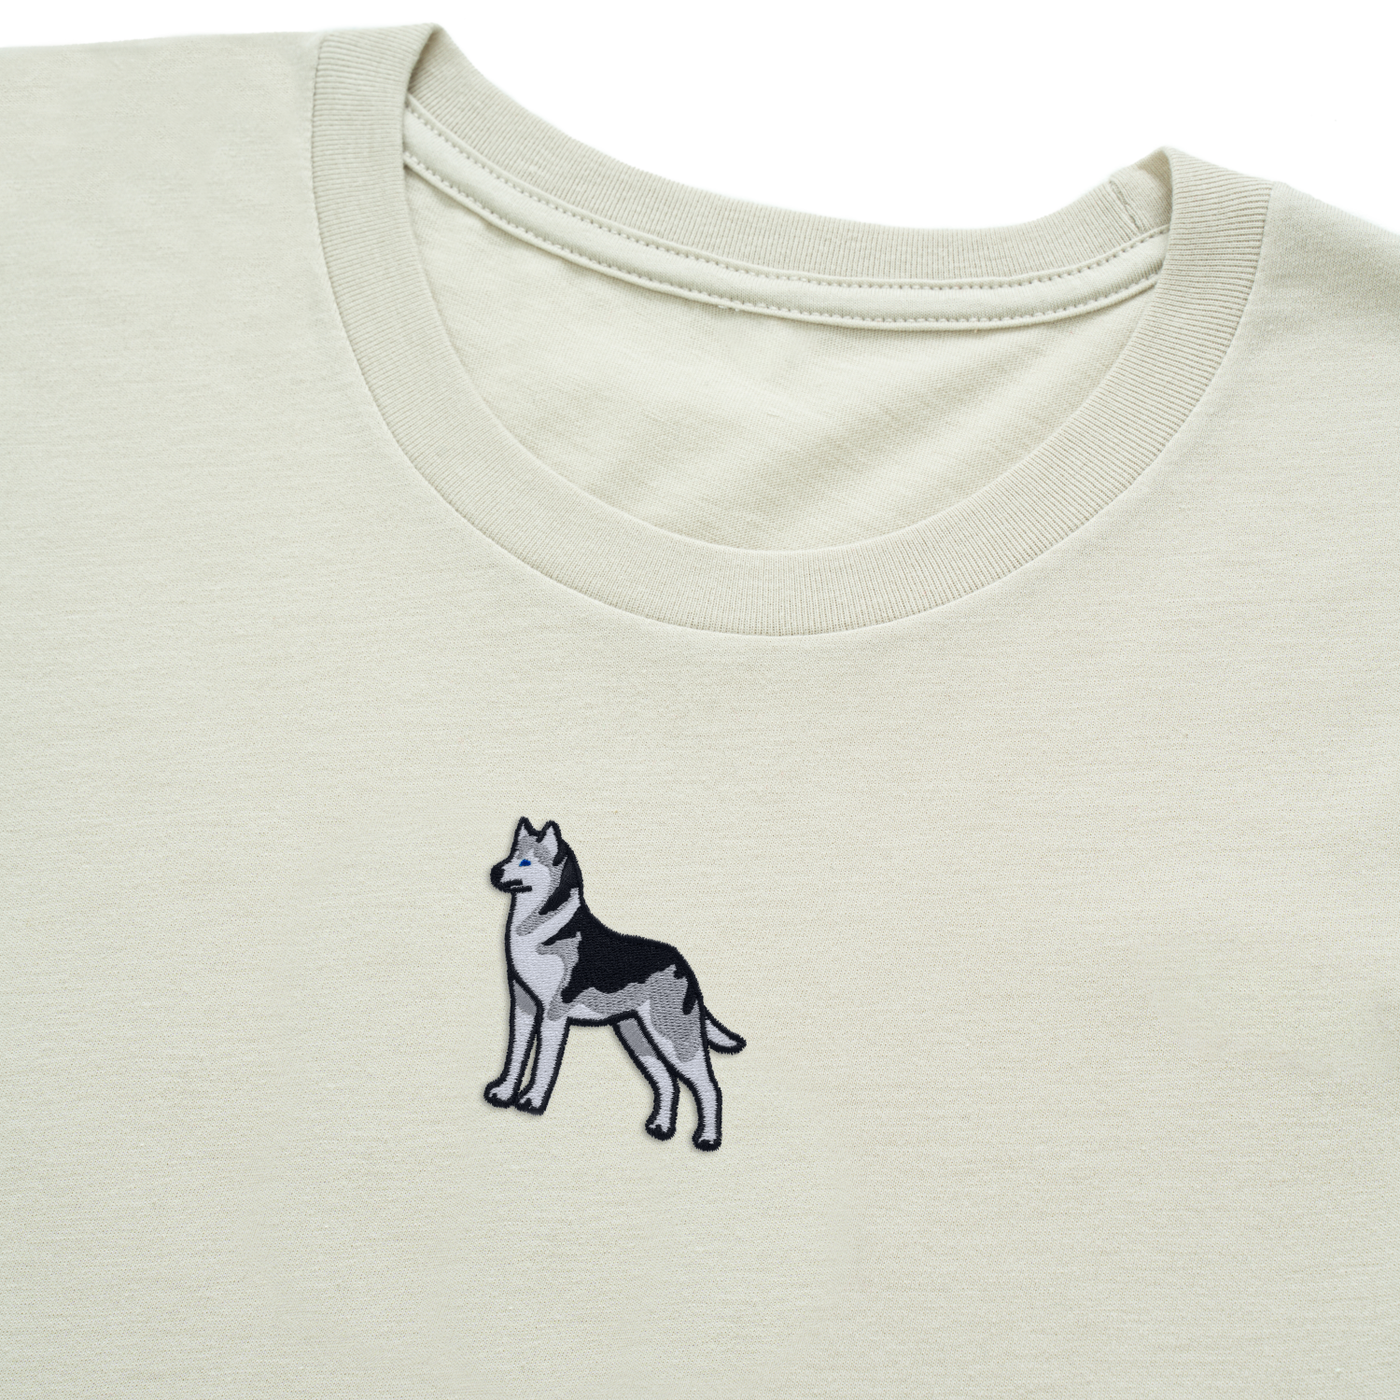 Bobby's Planet Men's Embroidered Siberian Husky T-Shirt from Paws Dog Cat Animals Collection in Heather Dust Color#color_heather-dust